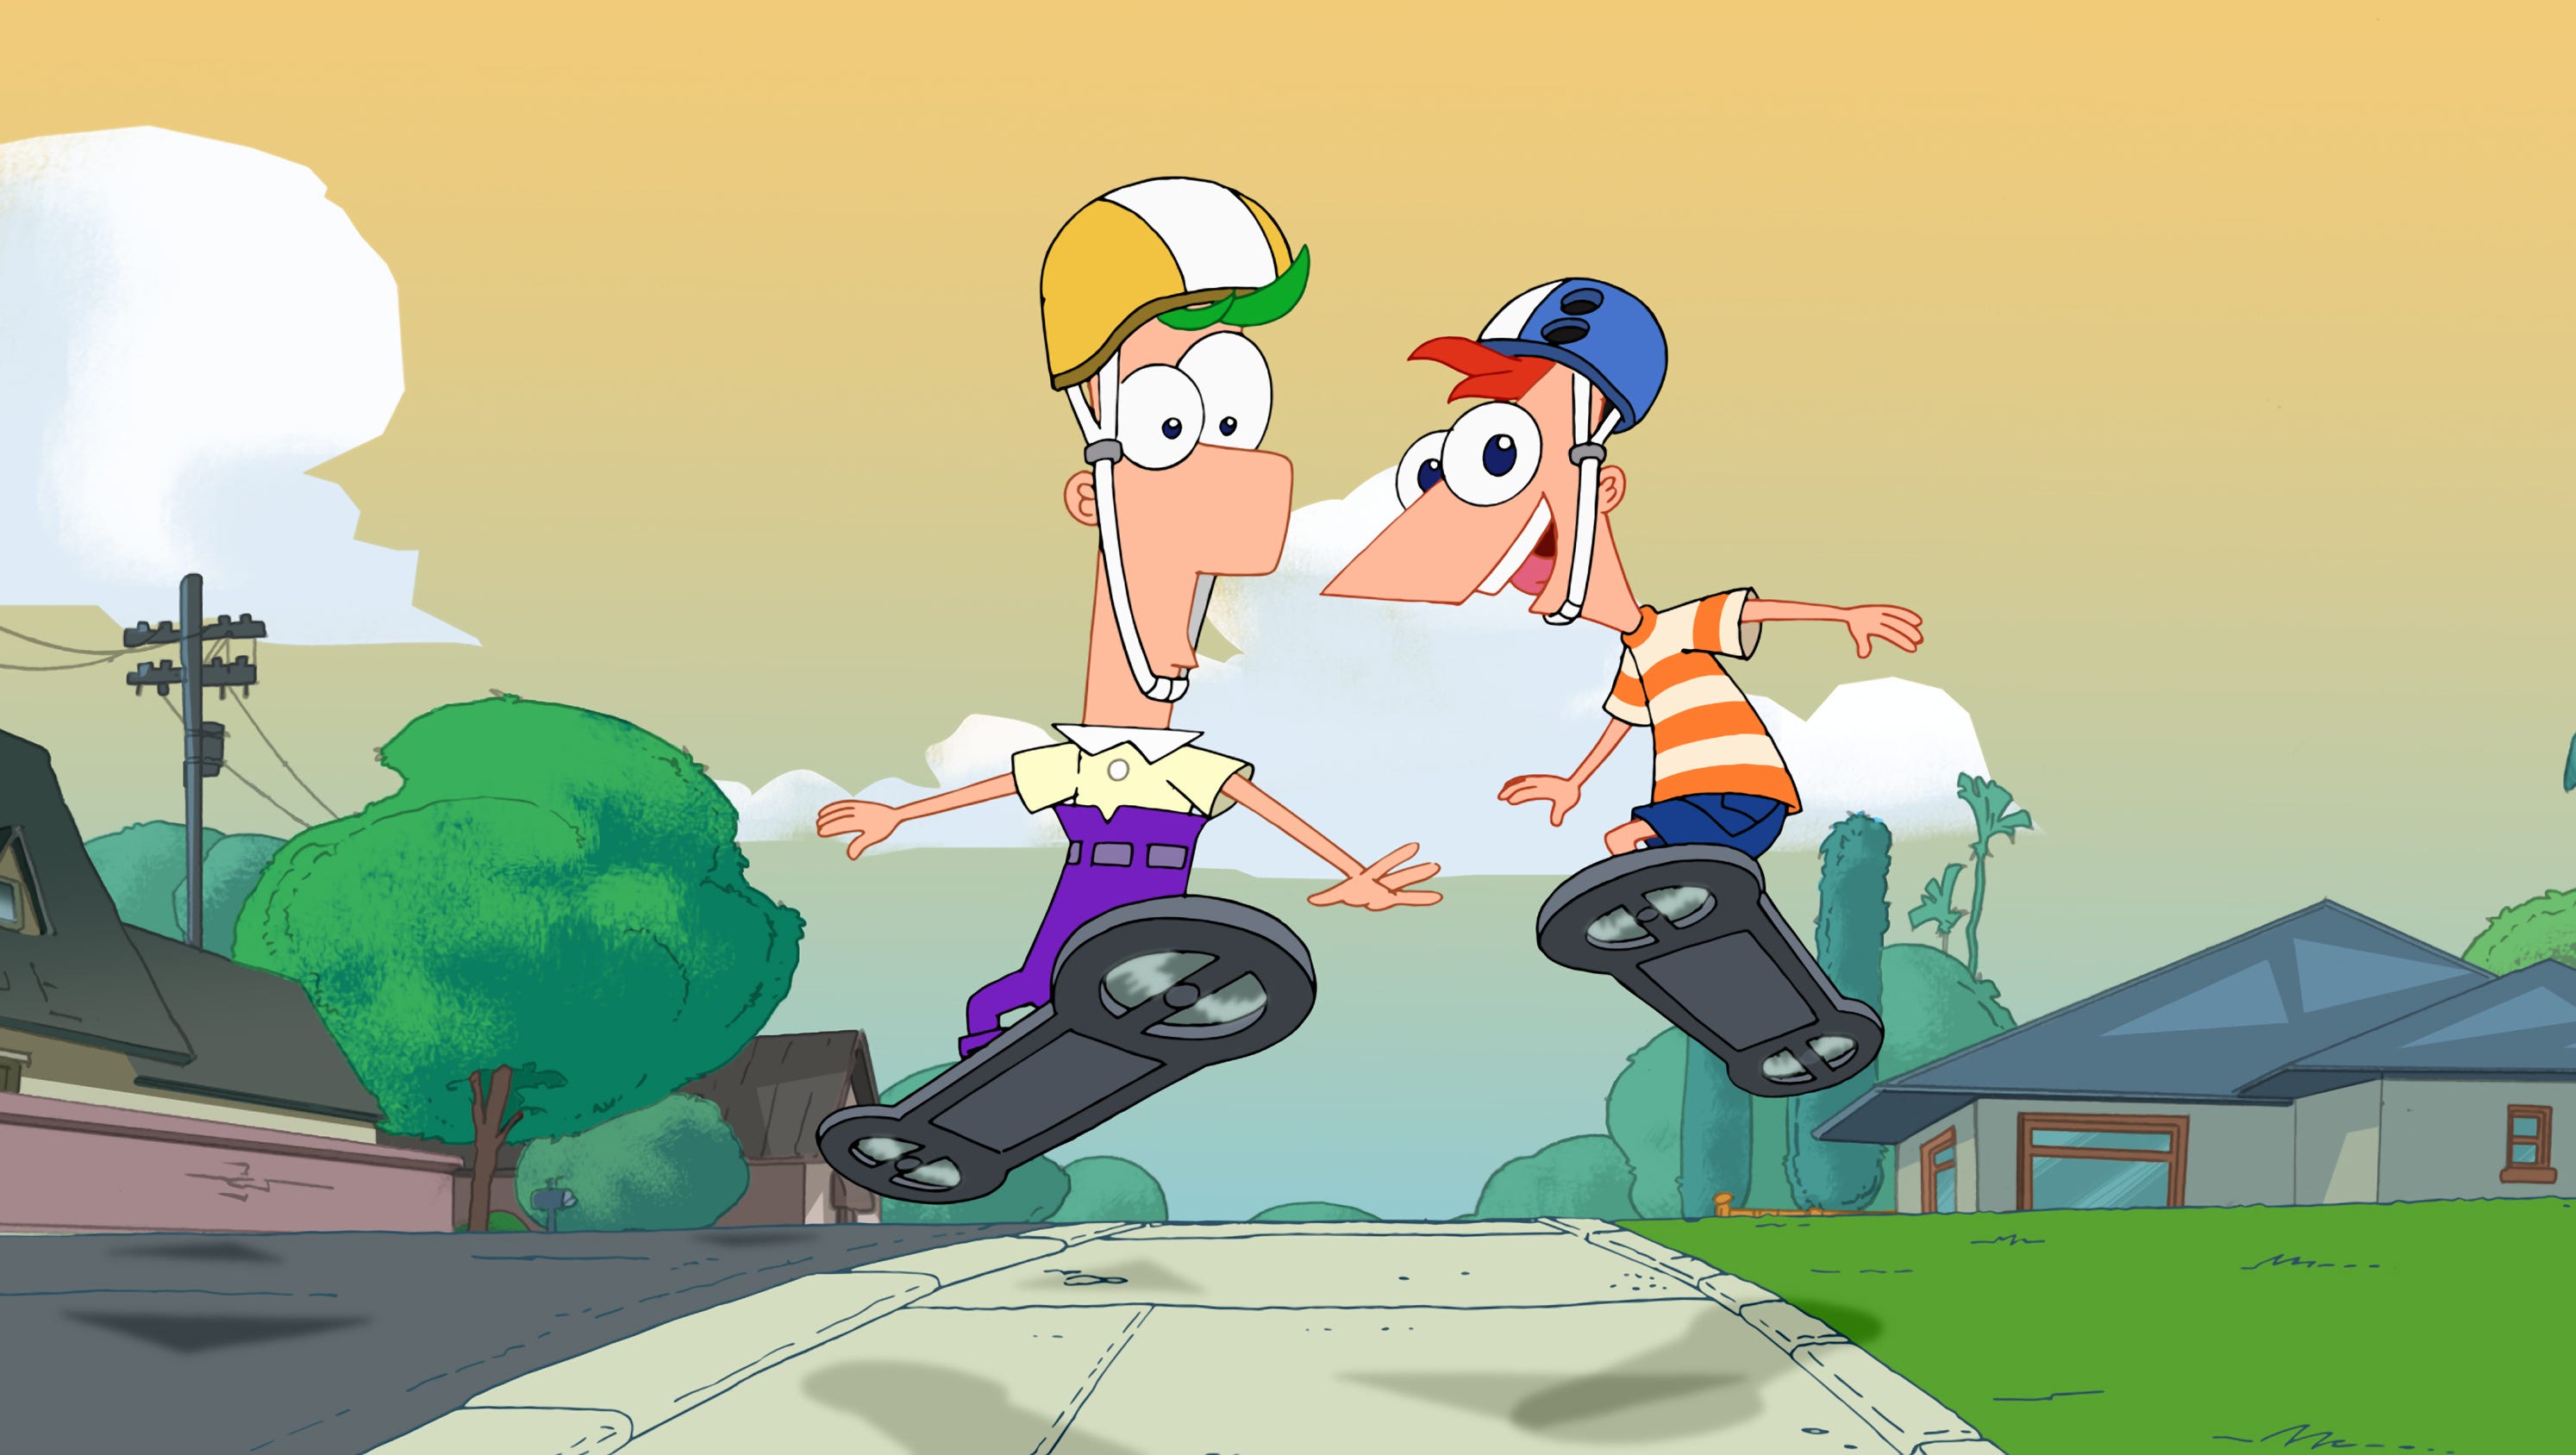 Phineas and Ferb' ending its run.